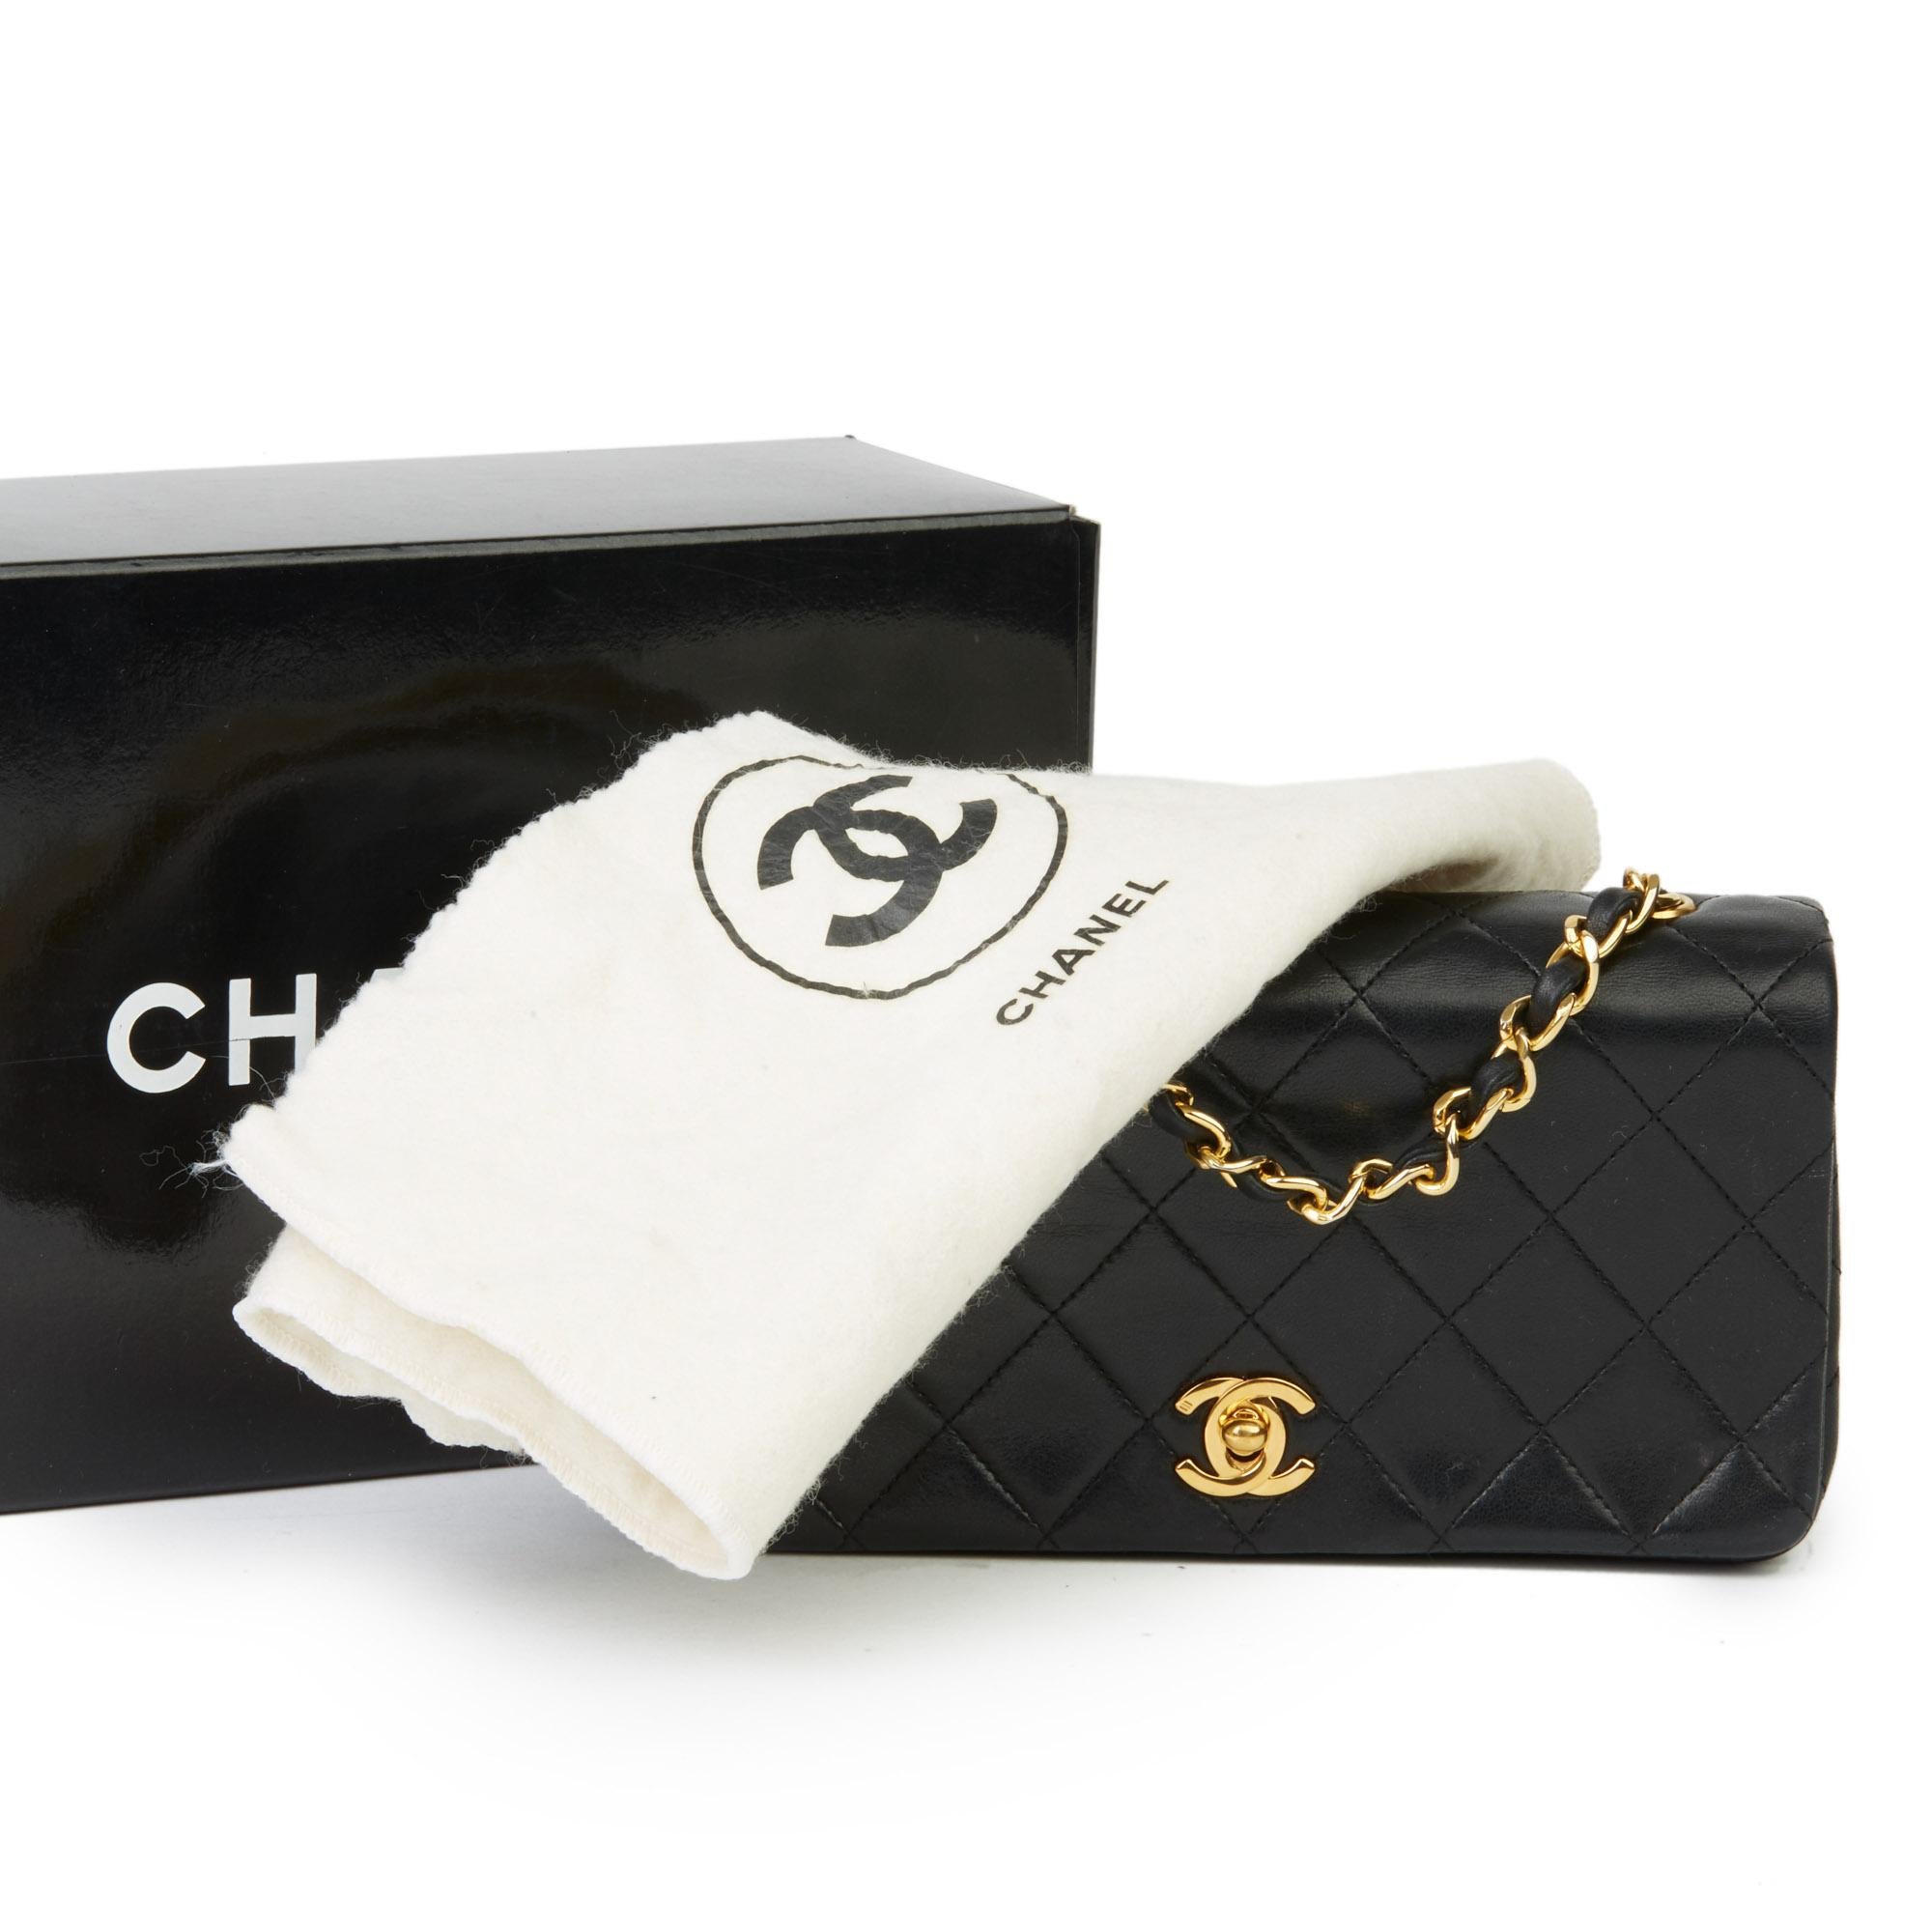 1990 Chanel Black Quilted Lambskin Vintage Mini Flap Bag 7